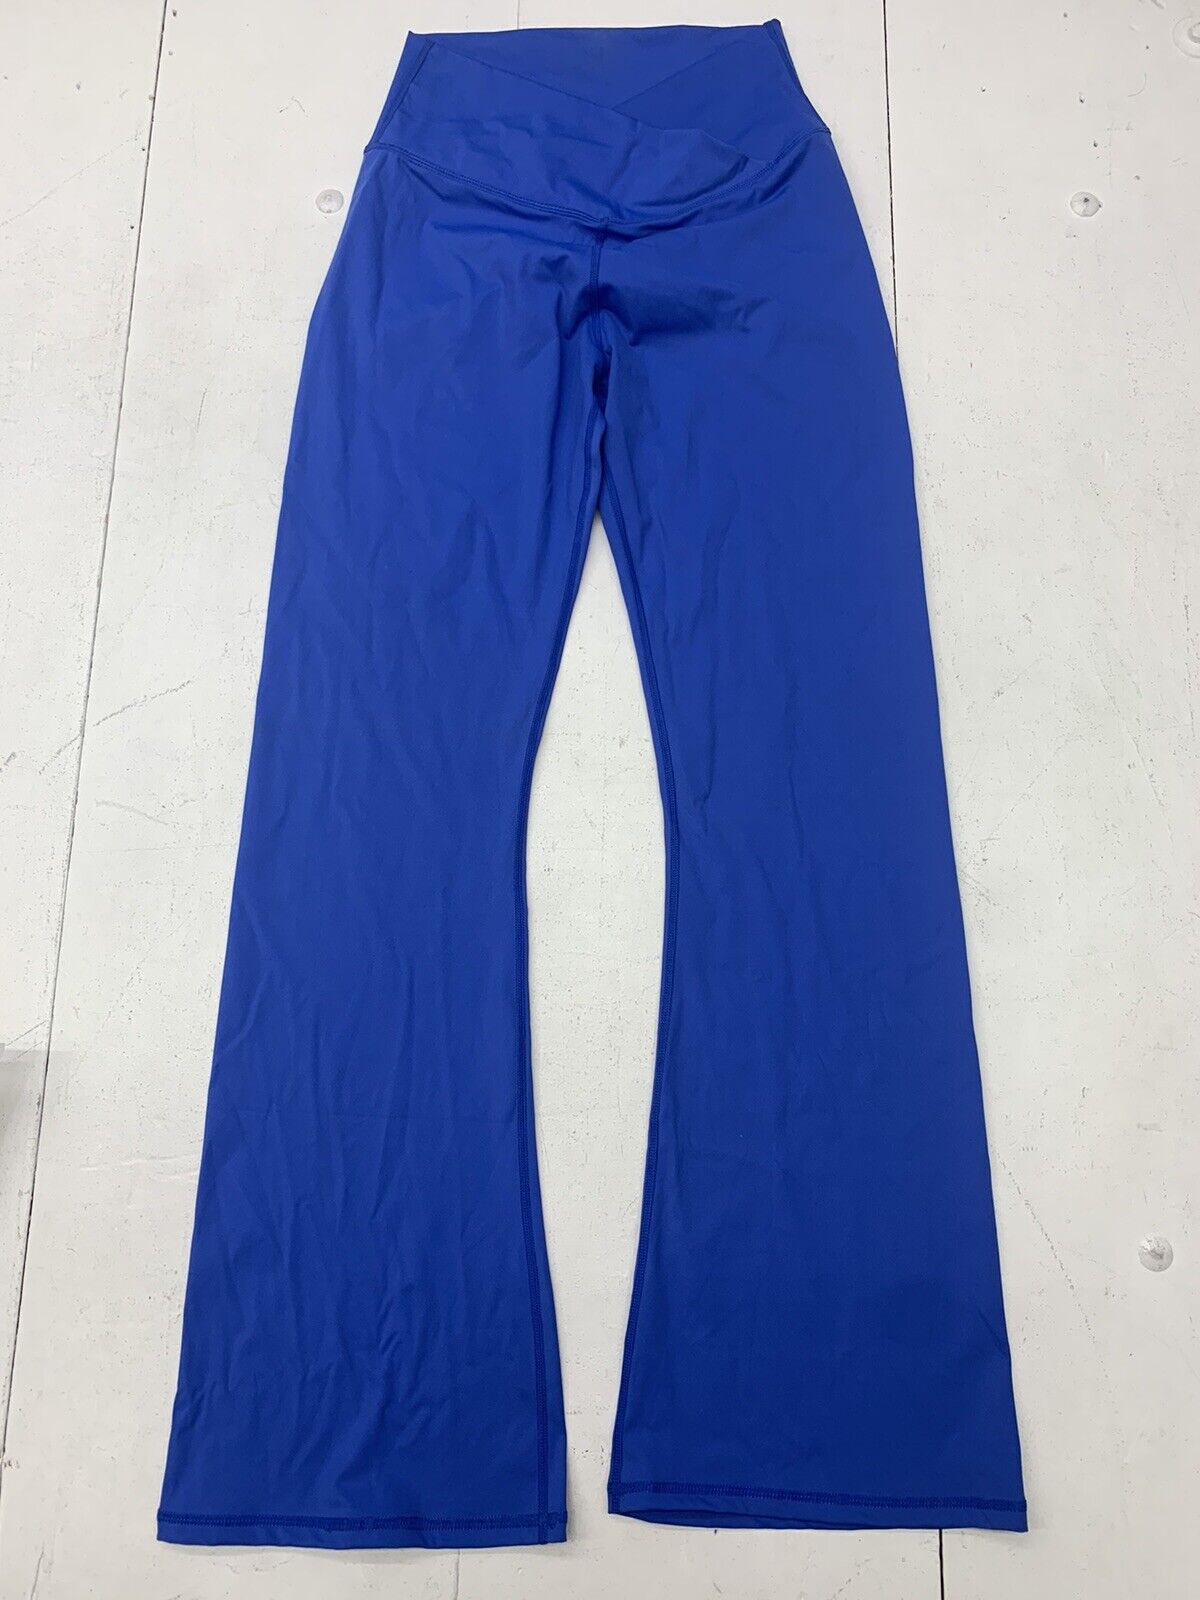 Unbranded Womens Blue High Waisted Athletic Leggings Size Large